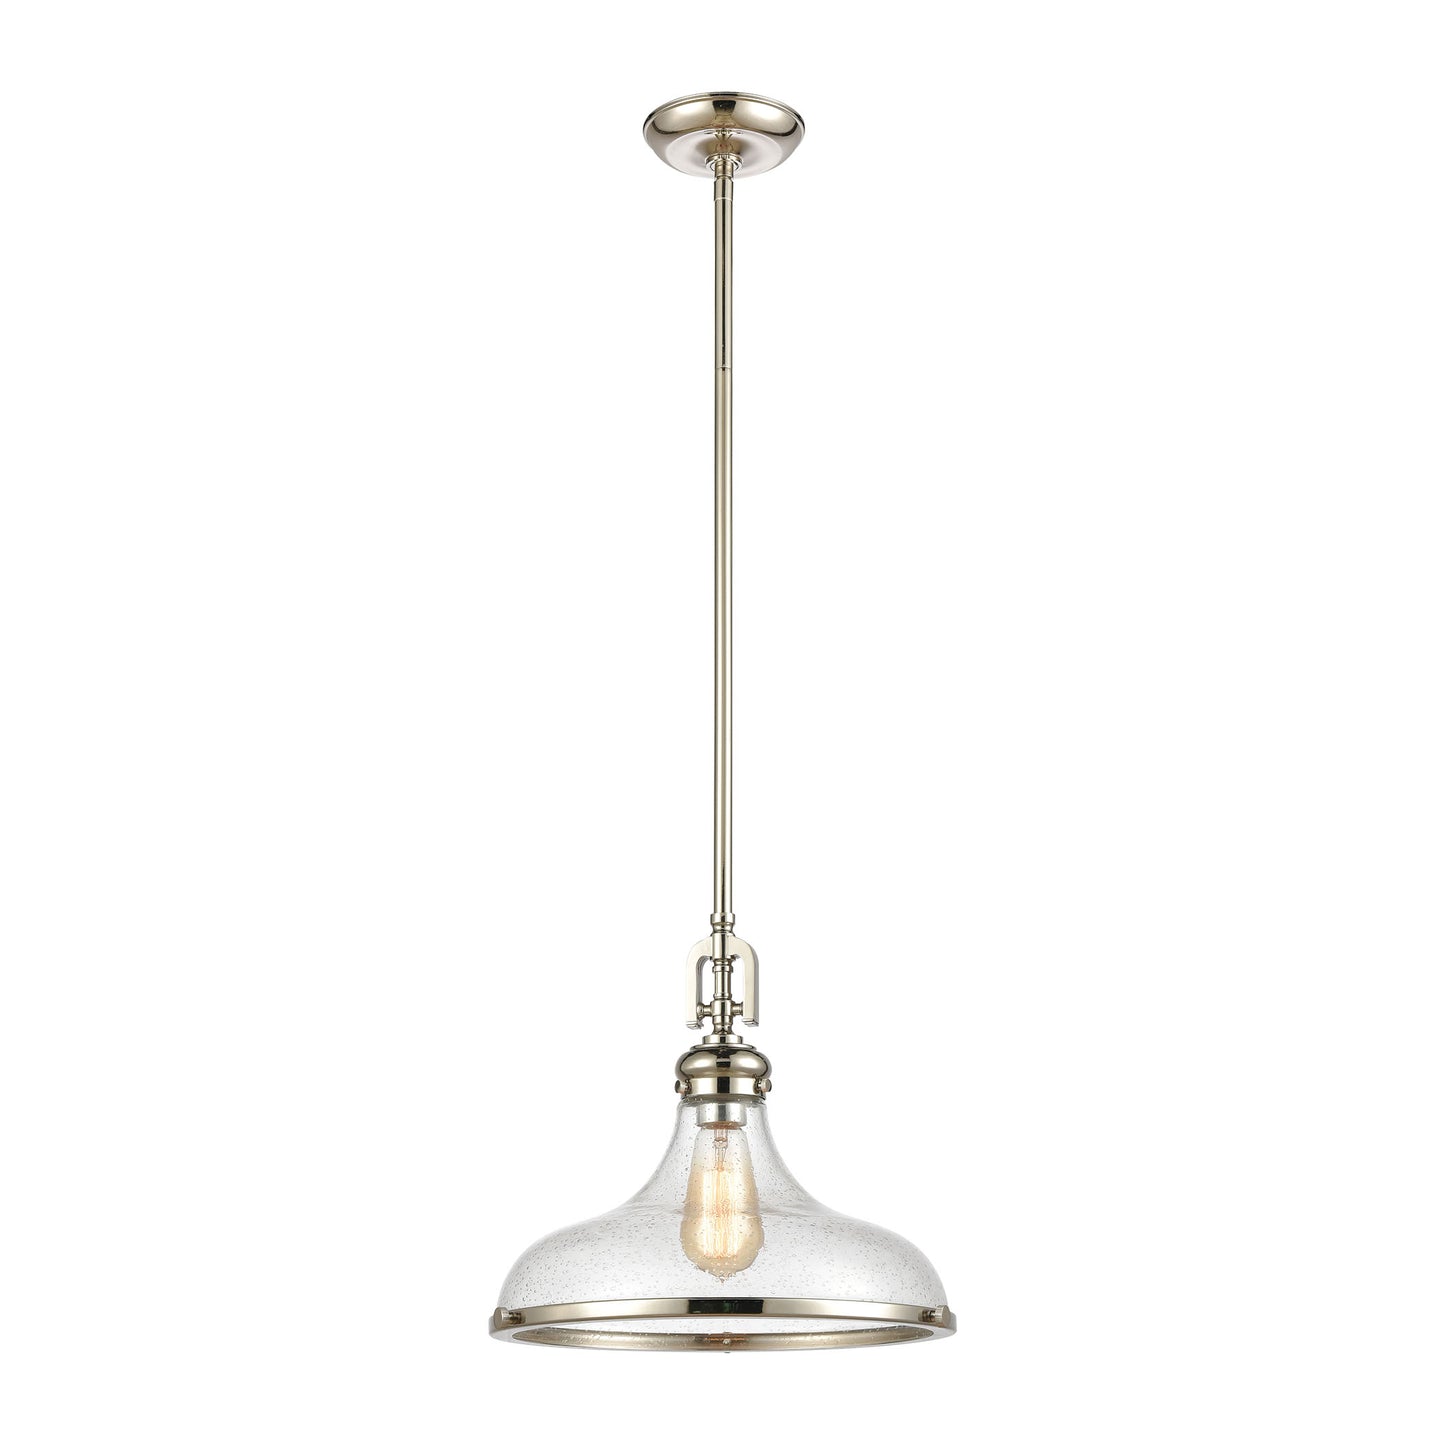 ELK Lighting 57381/1 - Rutherford 15" Wide 1-Light Pendant in Polished Nickel with Seedy Glass